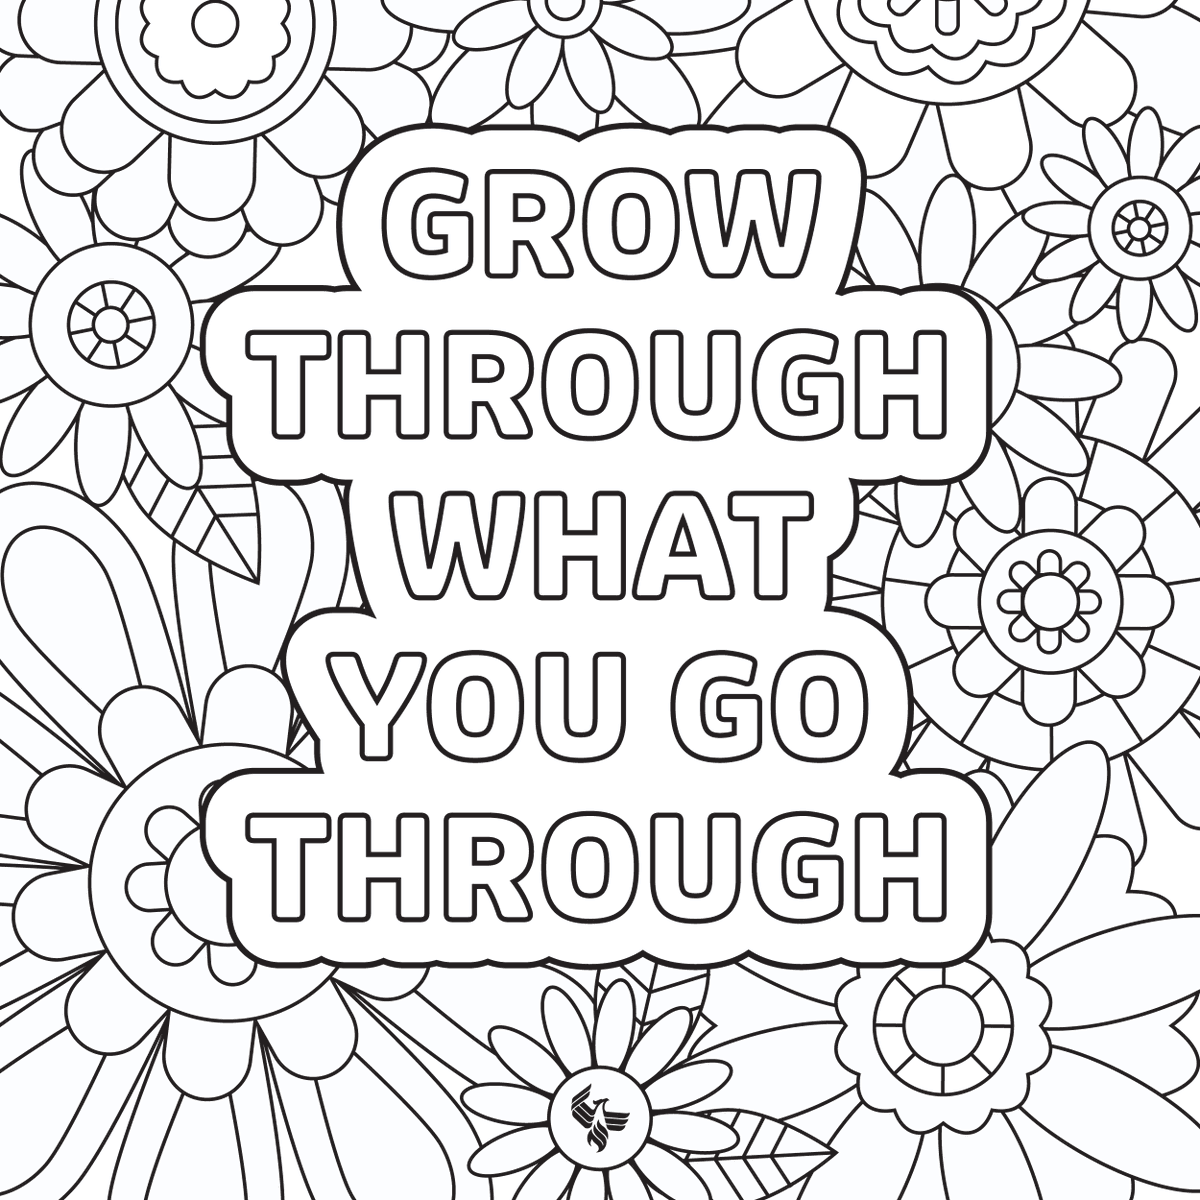 We fall. We rise. We learn. We grow. 🌱 Download this coloring page and enjoy some creative relaxation: uof.ph/ztmuBG